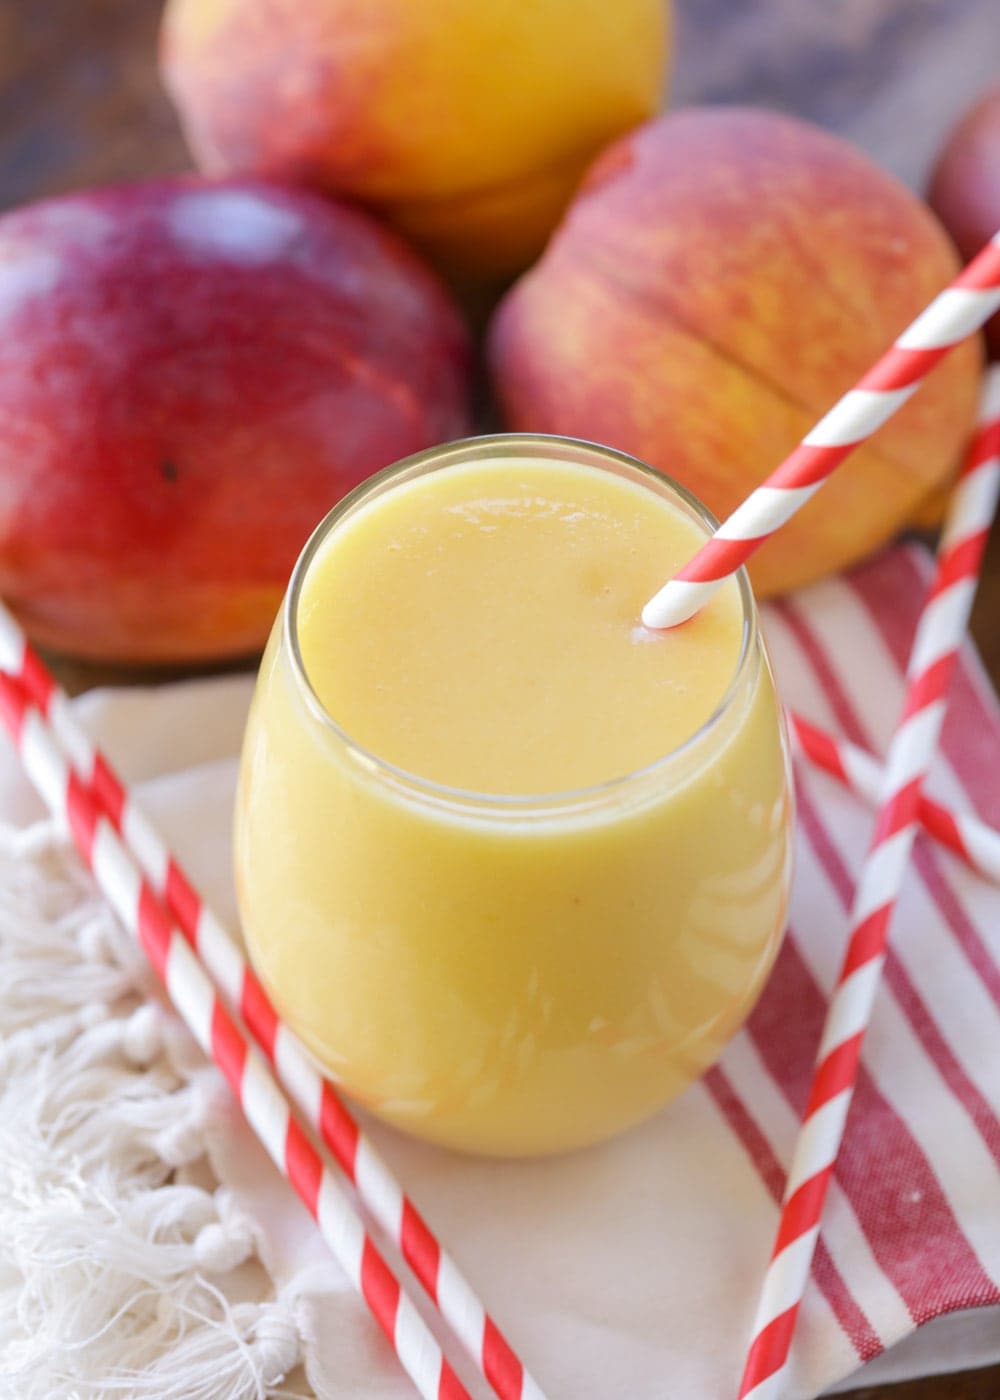 Peach smoothie - mango peach smoothie in a glass with a red and white straw.